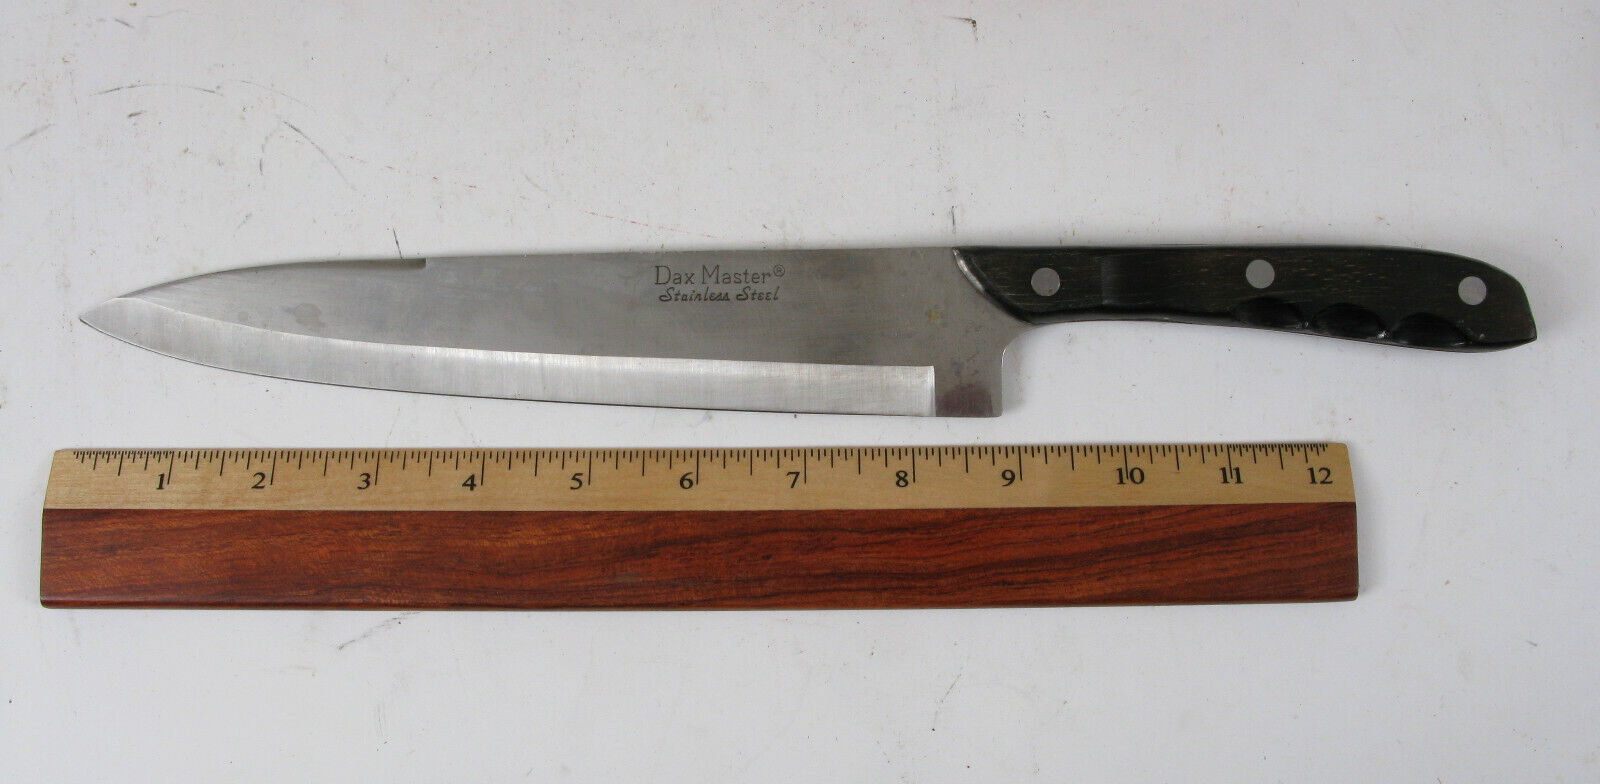 VINTAGE DAX MASTER STAINLESS STEEL CUTLERY BUTCHER CHEF KNIFE NICE 